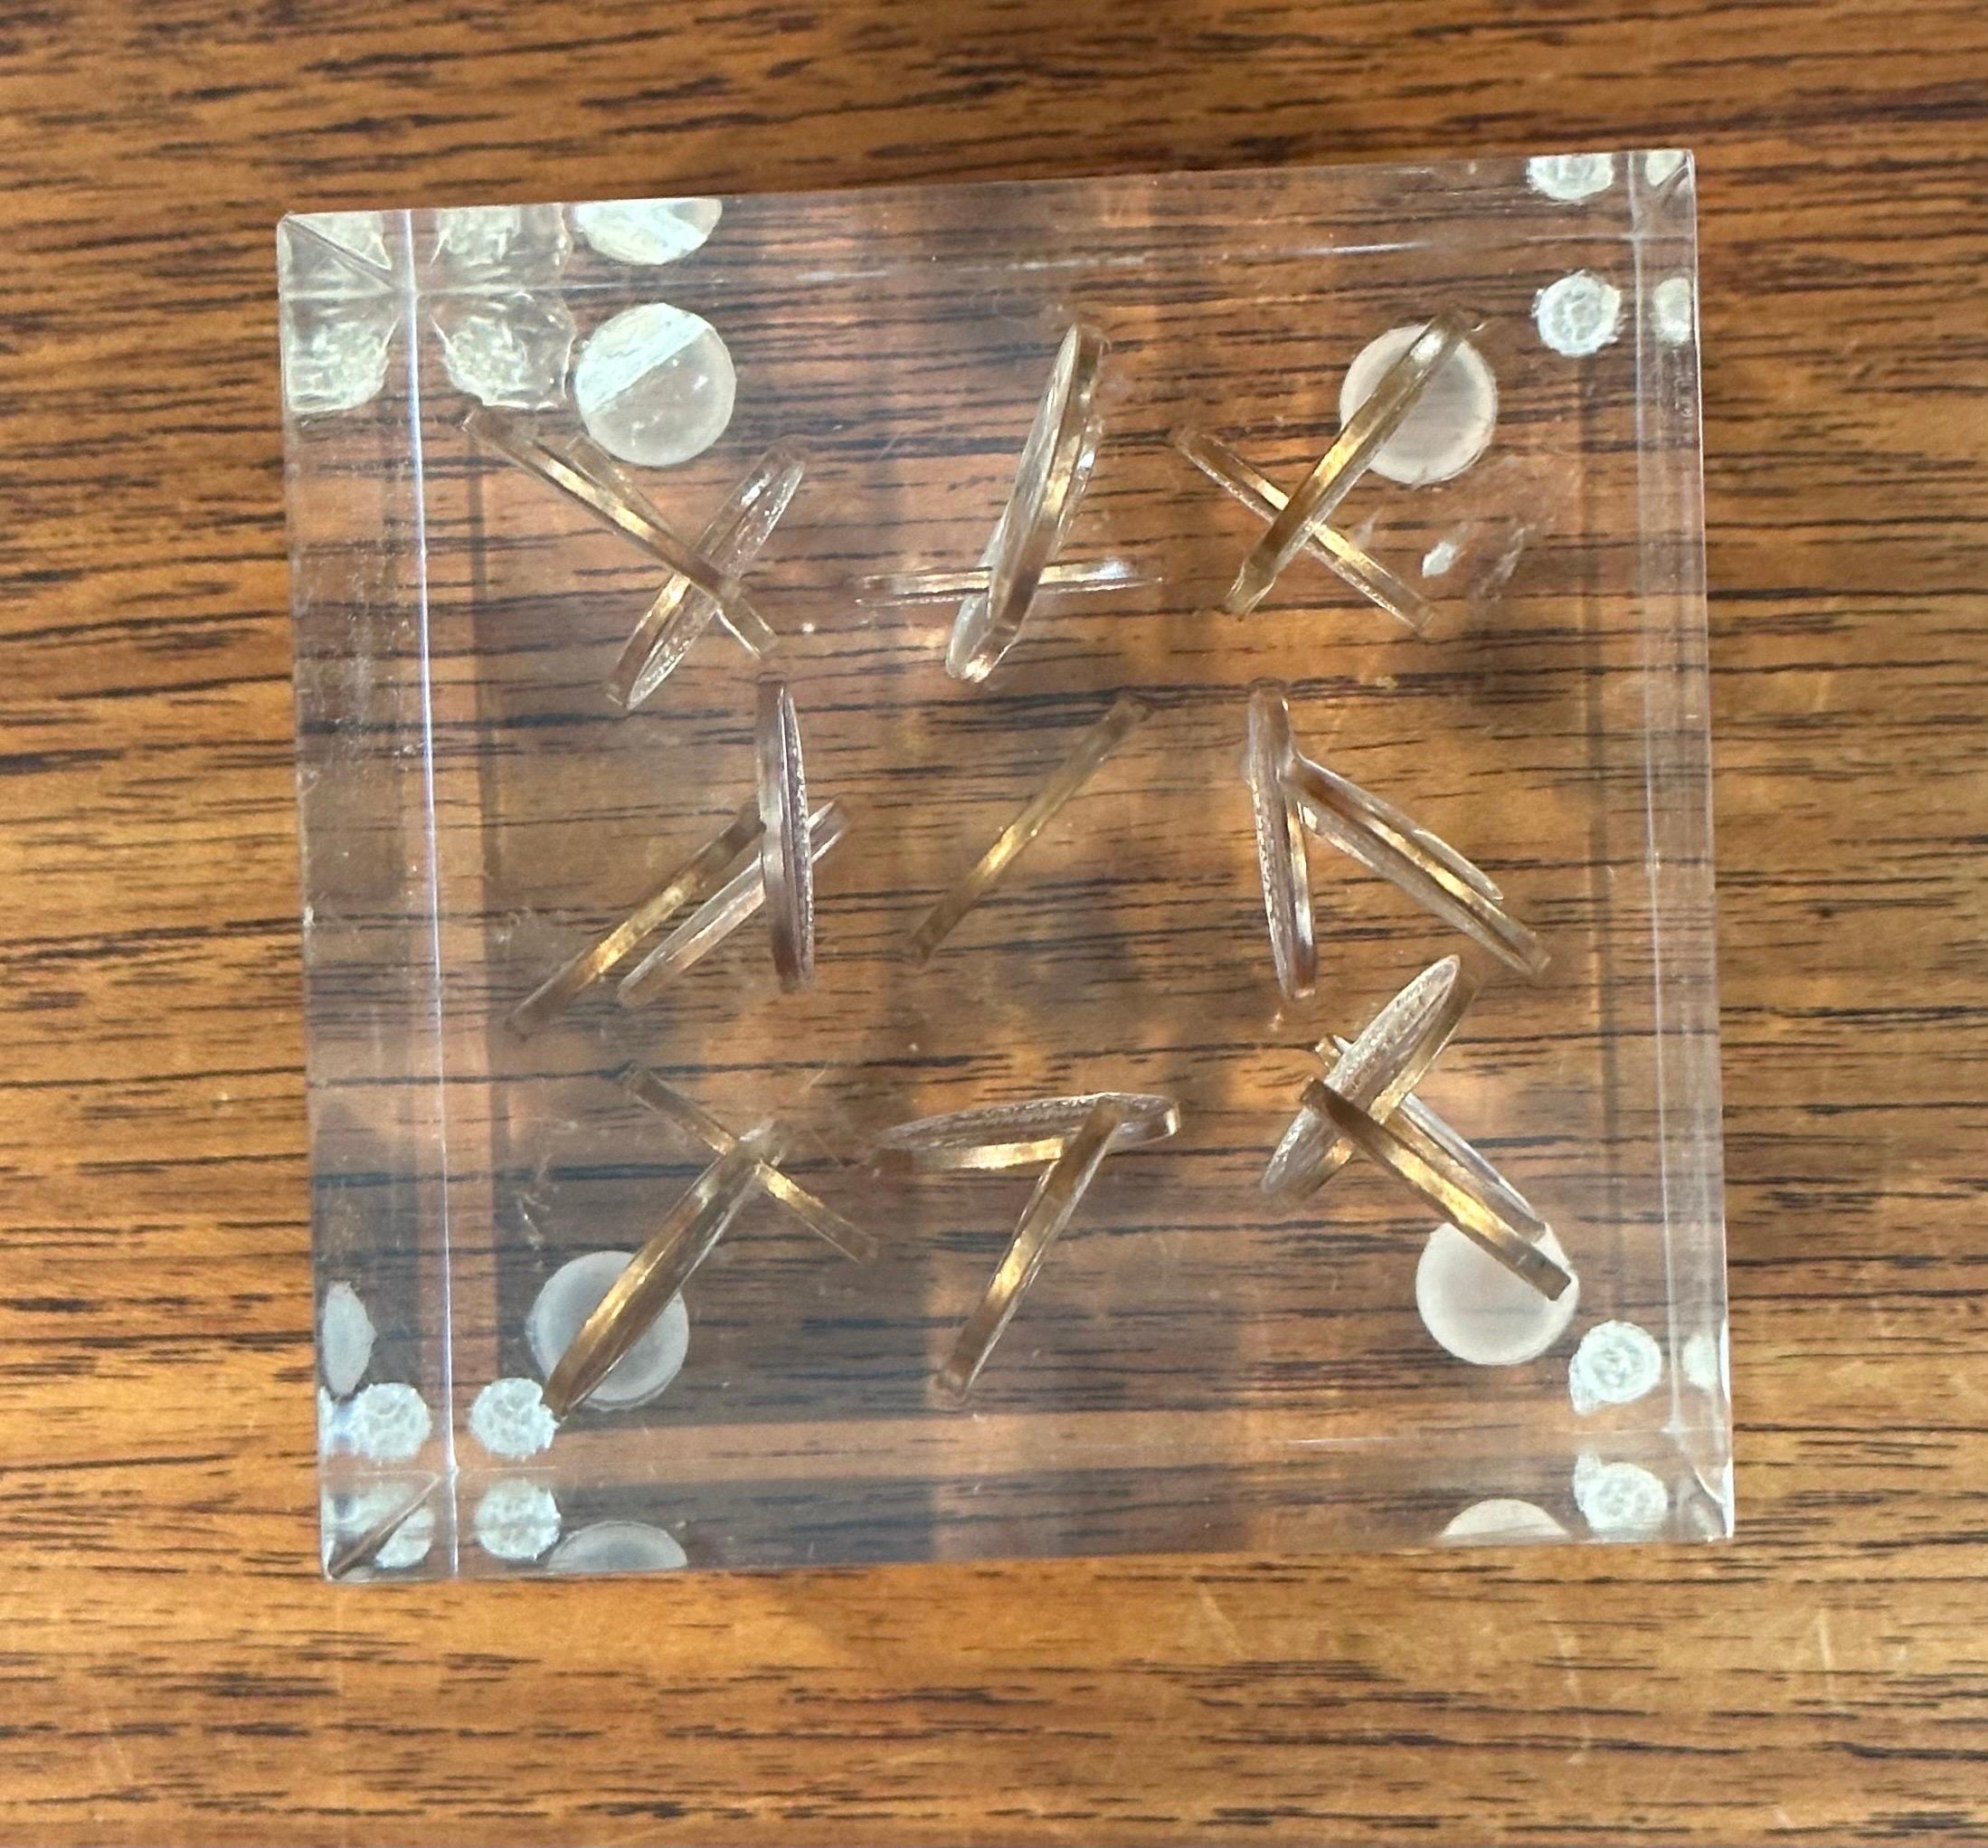 Floating Pennies in Lucite Cube Paperweight in the Style of William Rolfe 1